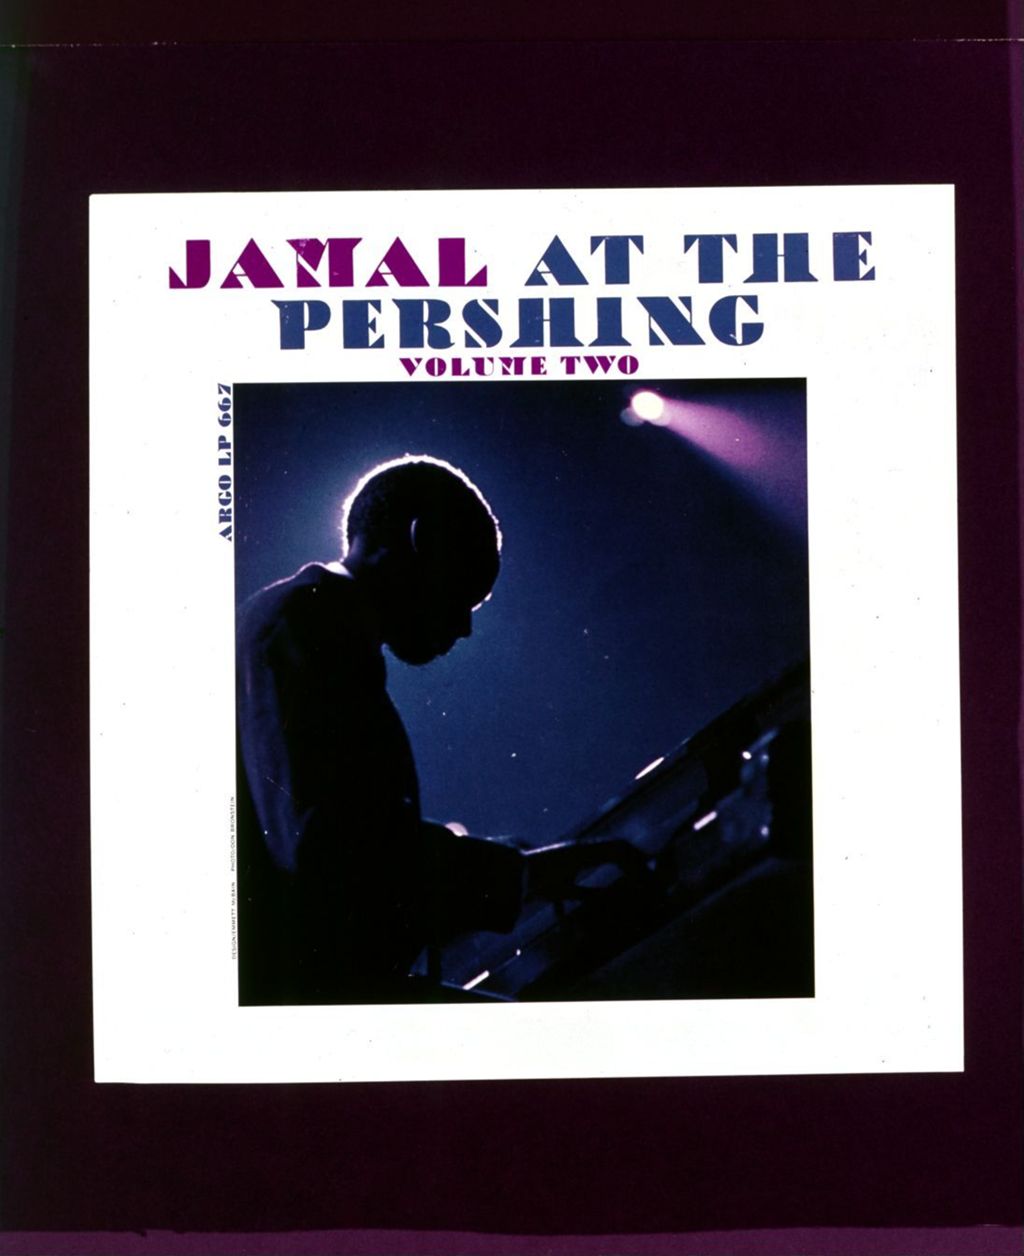 Jamal At The Pershing Volume Two, album cover